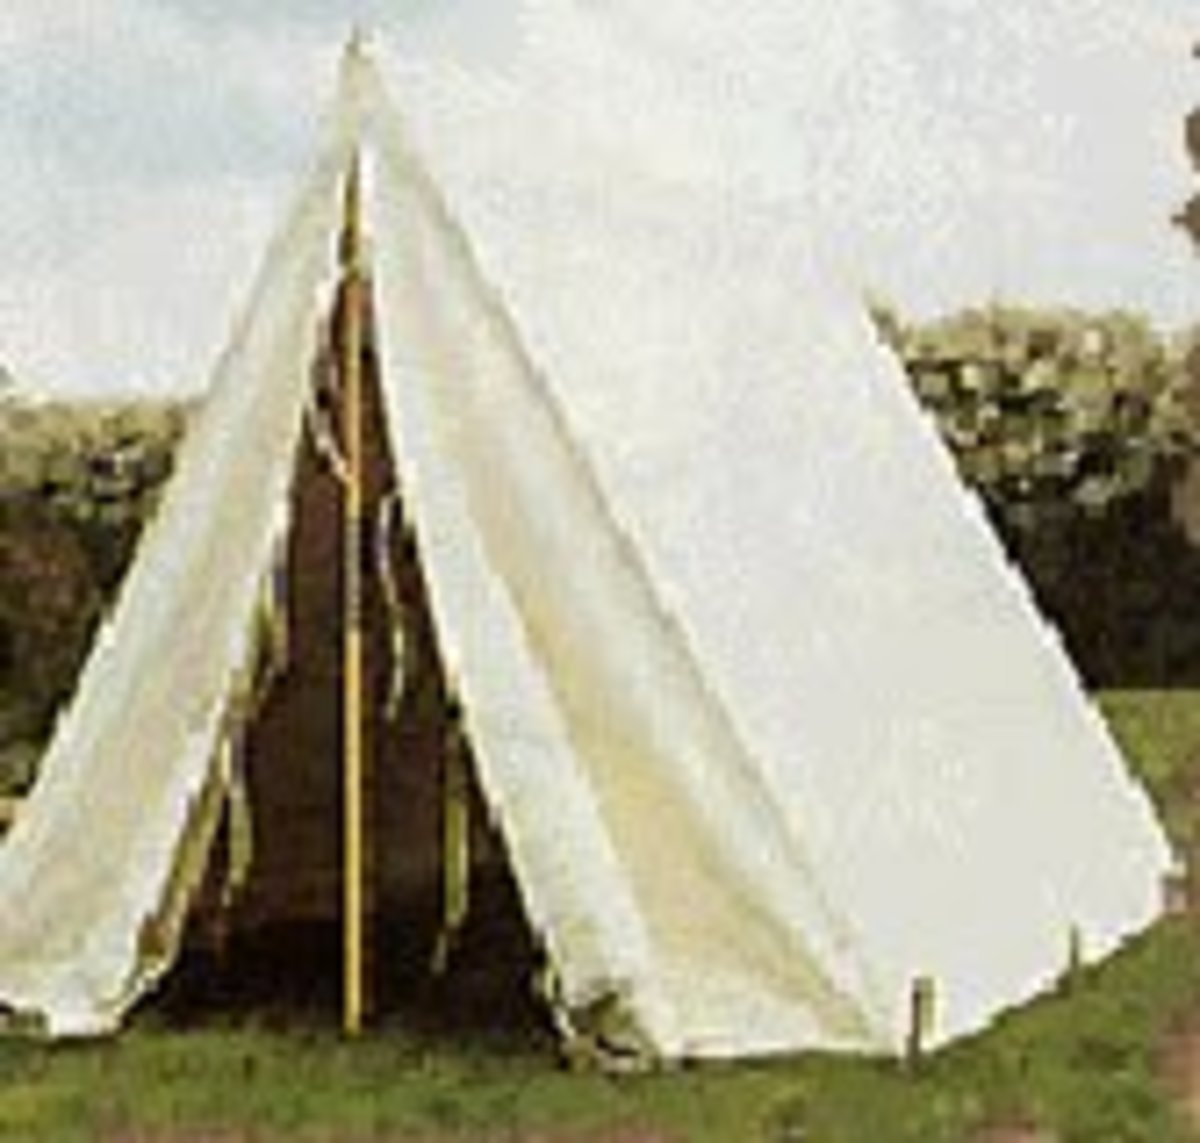 Modern representation of a Wedge Tent